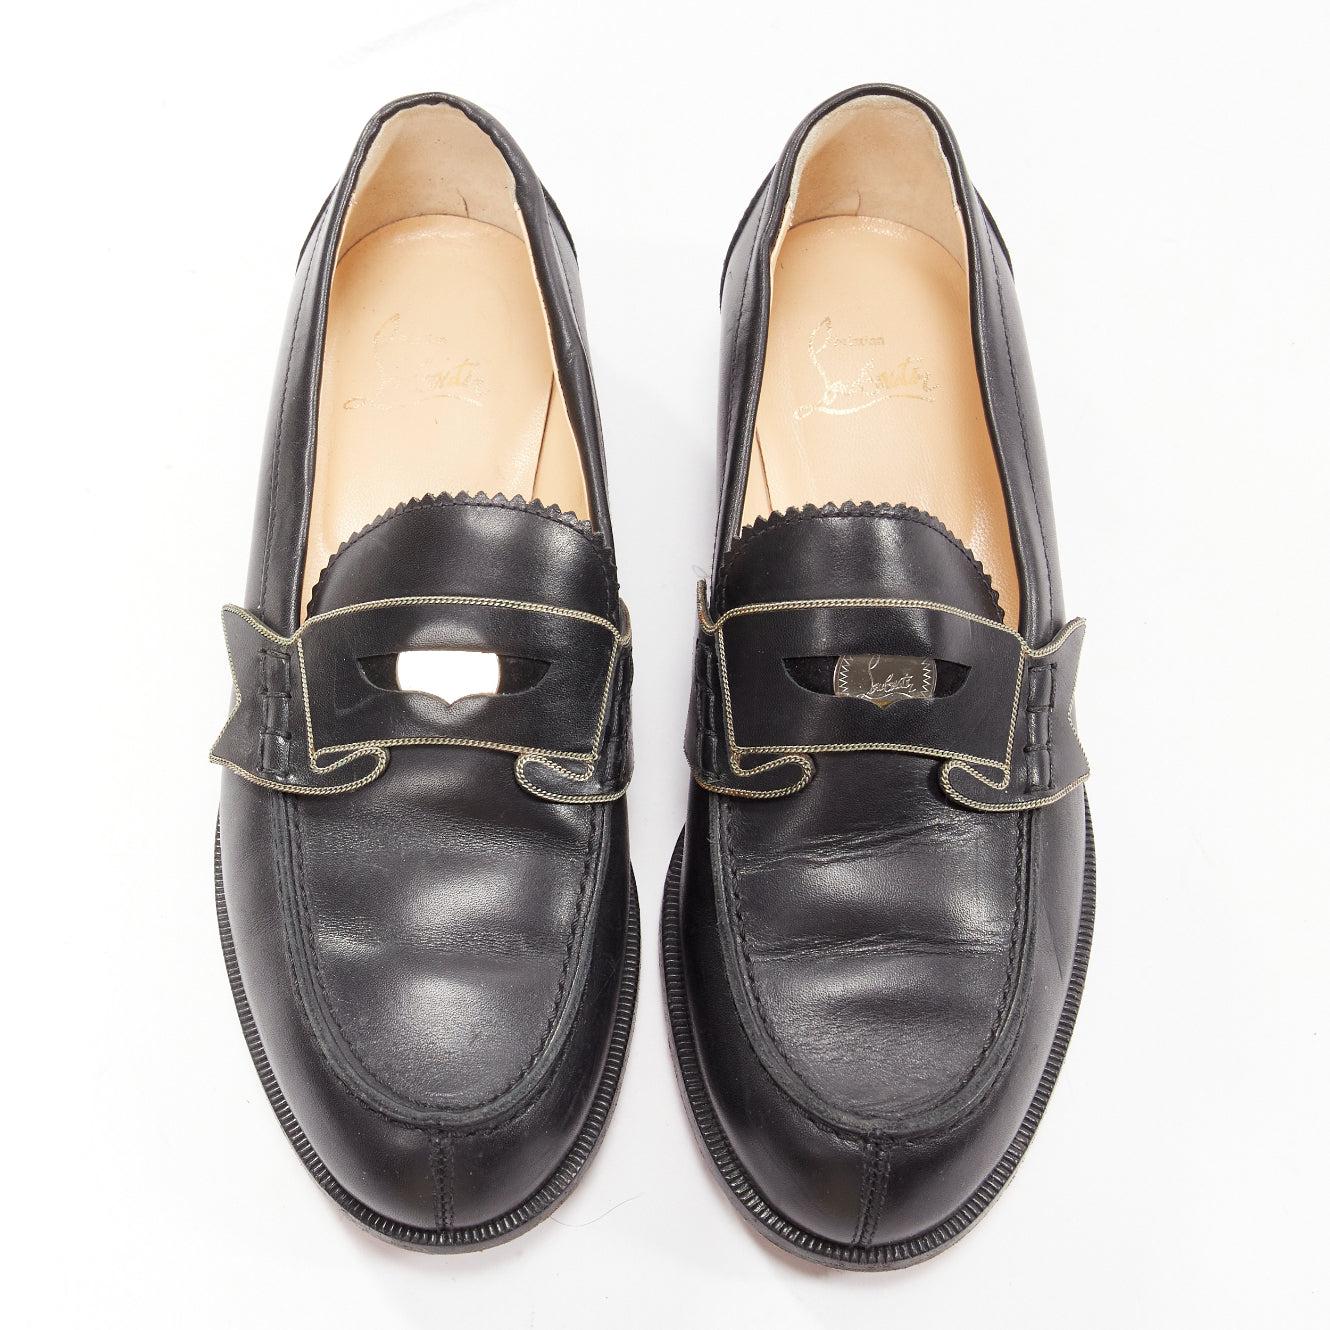 CHRISTIAN LOUBOUTIN Penny black smooth leather silver coin logo loafers EU35.5
Reference: YIKK/A00080
Brand: Christian Louboutin
Model: Penny
Material: Leather, Metal
Color: Black, Silver
Pattern: Solid
Closure: Slip On
Lining: Nude Leather
Extra